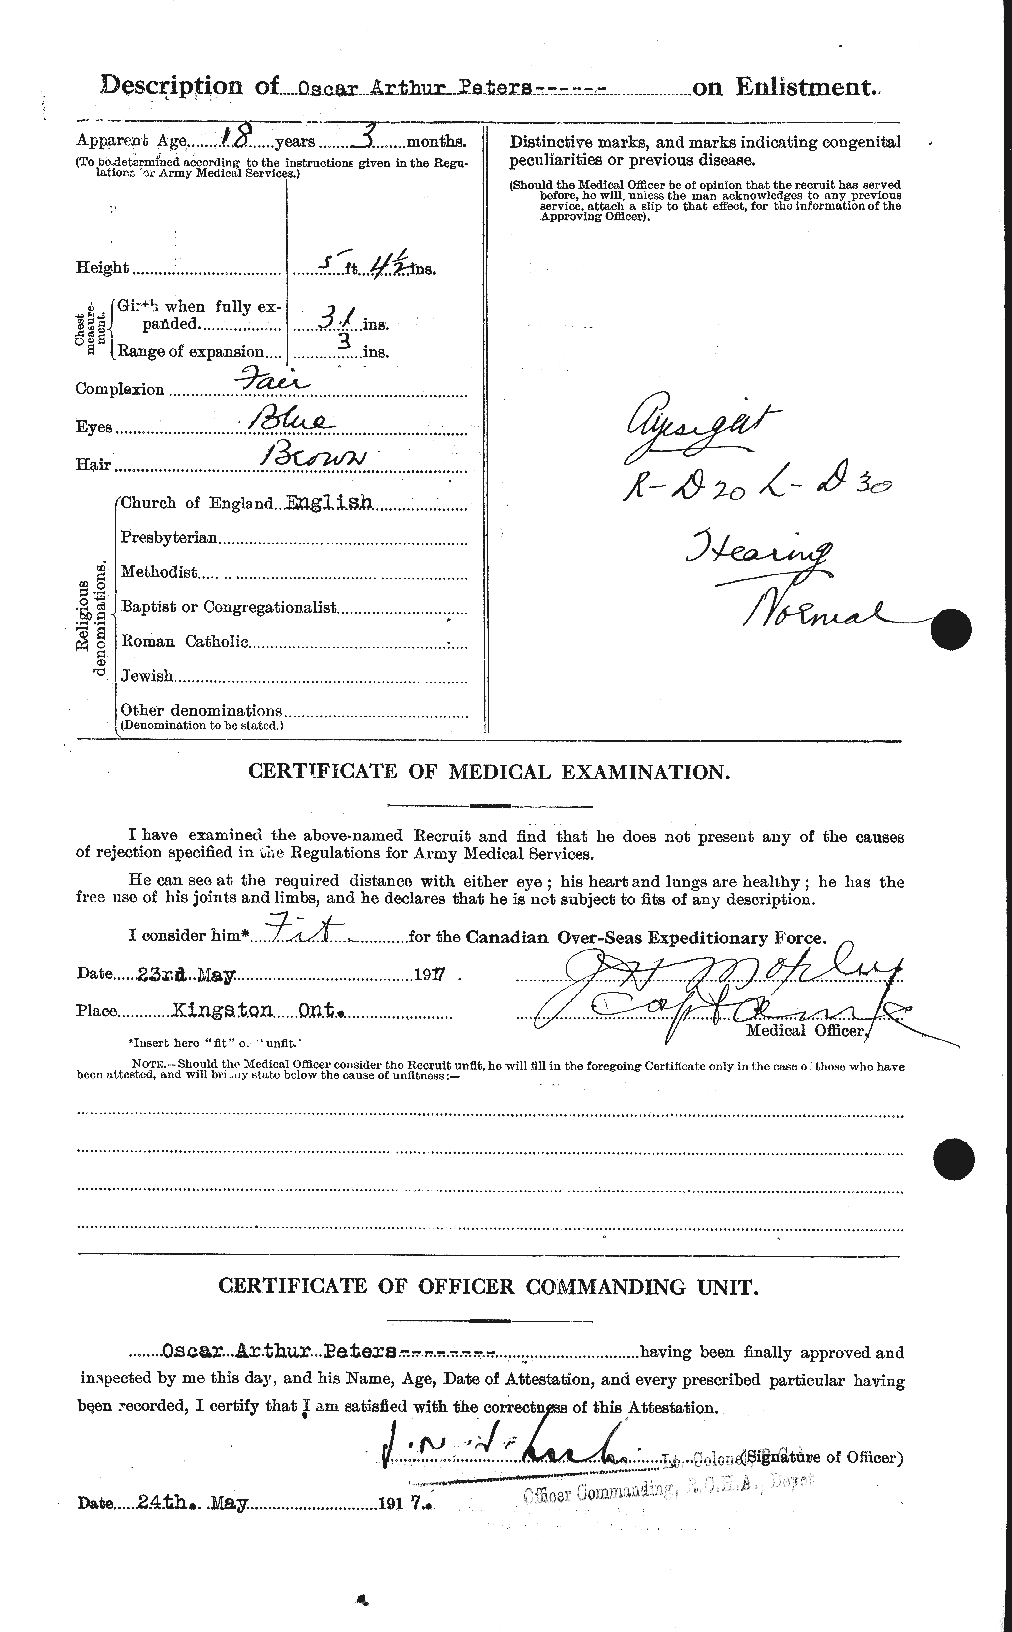 Personnel Records of the First World War - CEF 575591b